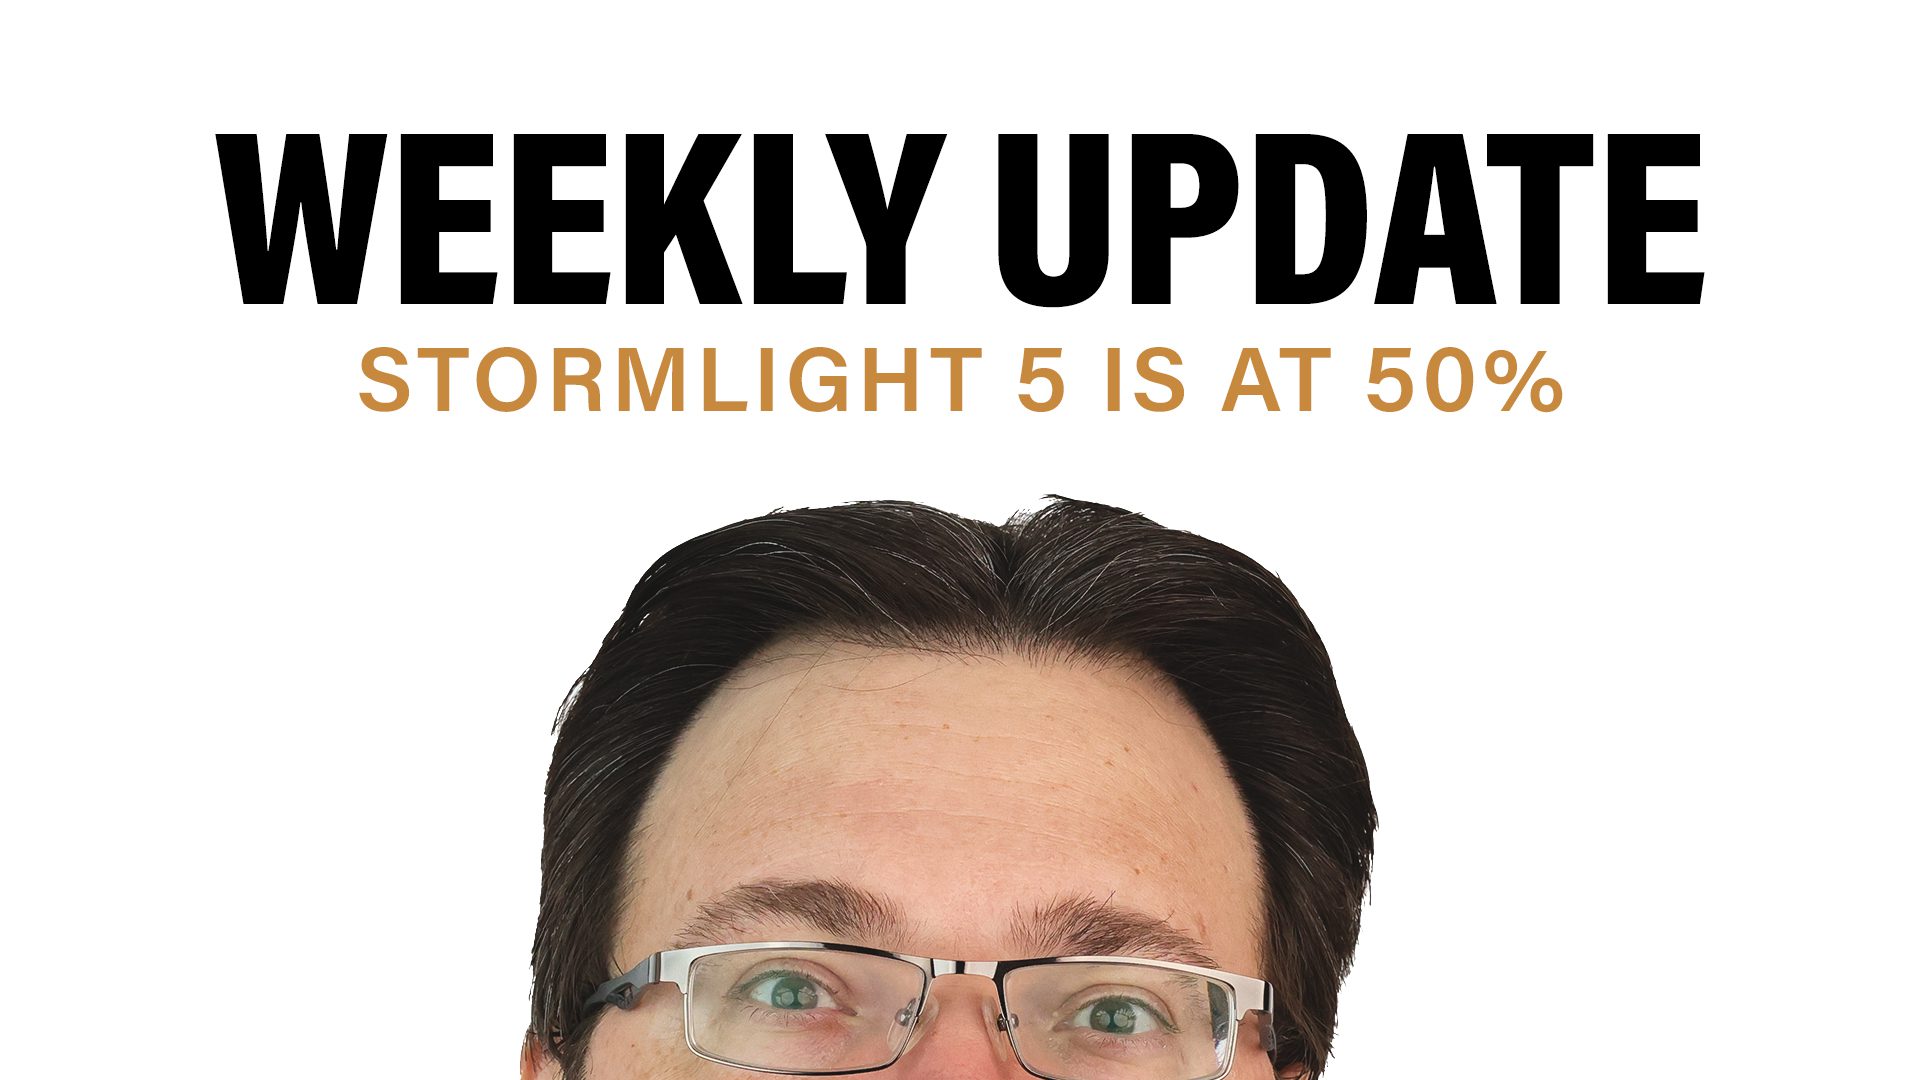 The title Weekly Update with the subtitle STORMLIGHT IS AT 50% with half of Brandon's face below